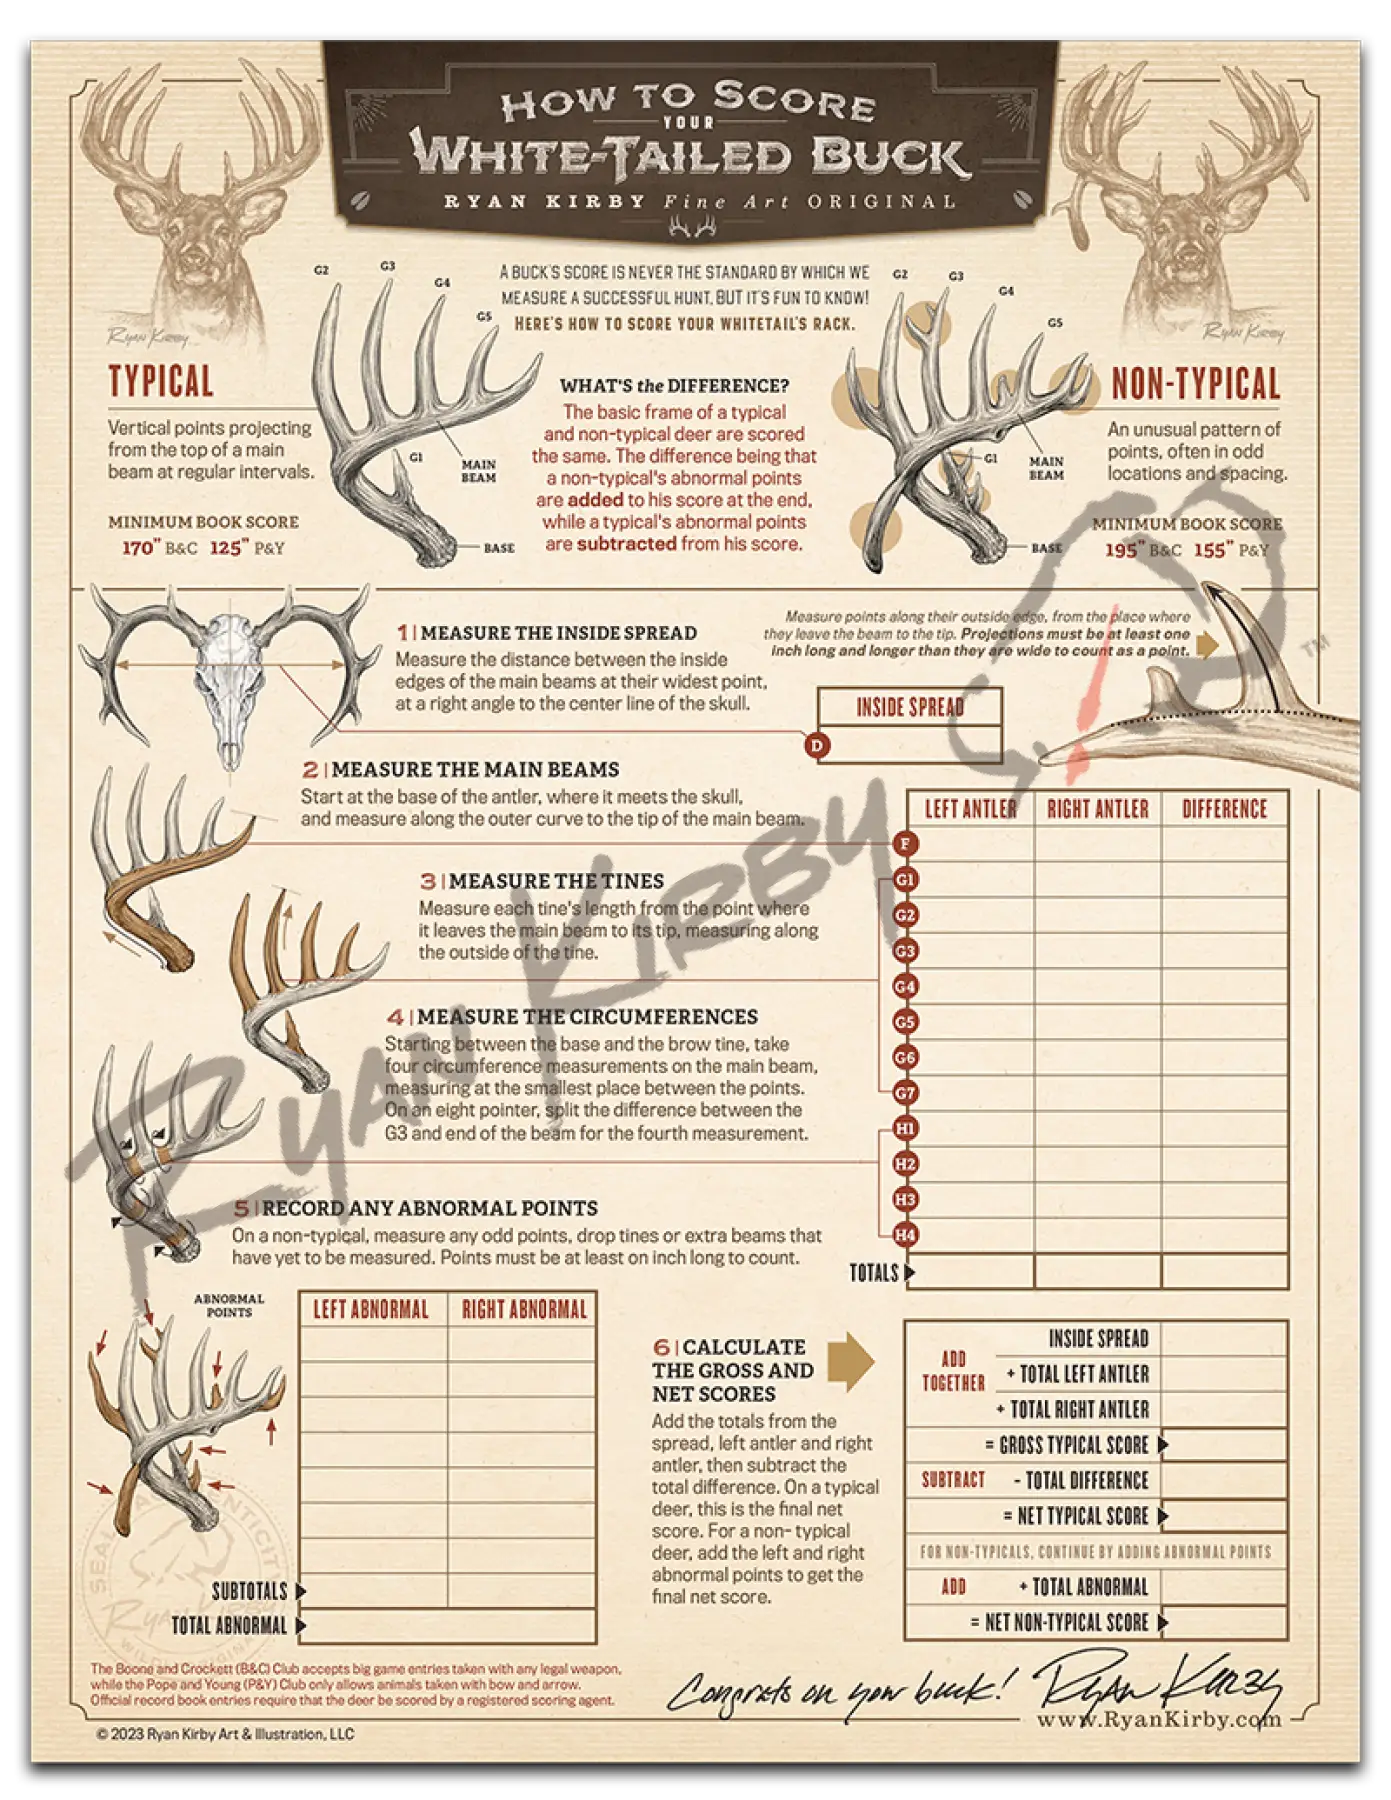 ’The Scoring & Field-Judging Of The White-Tailed Buck’ Paper Art Print